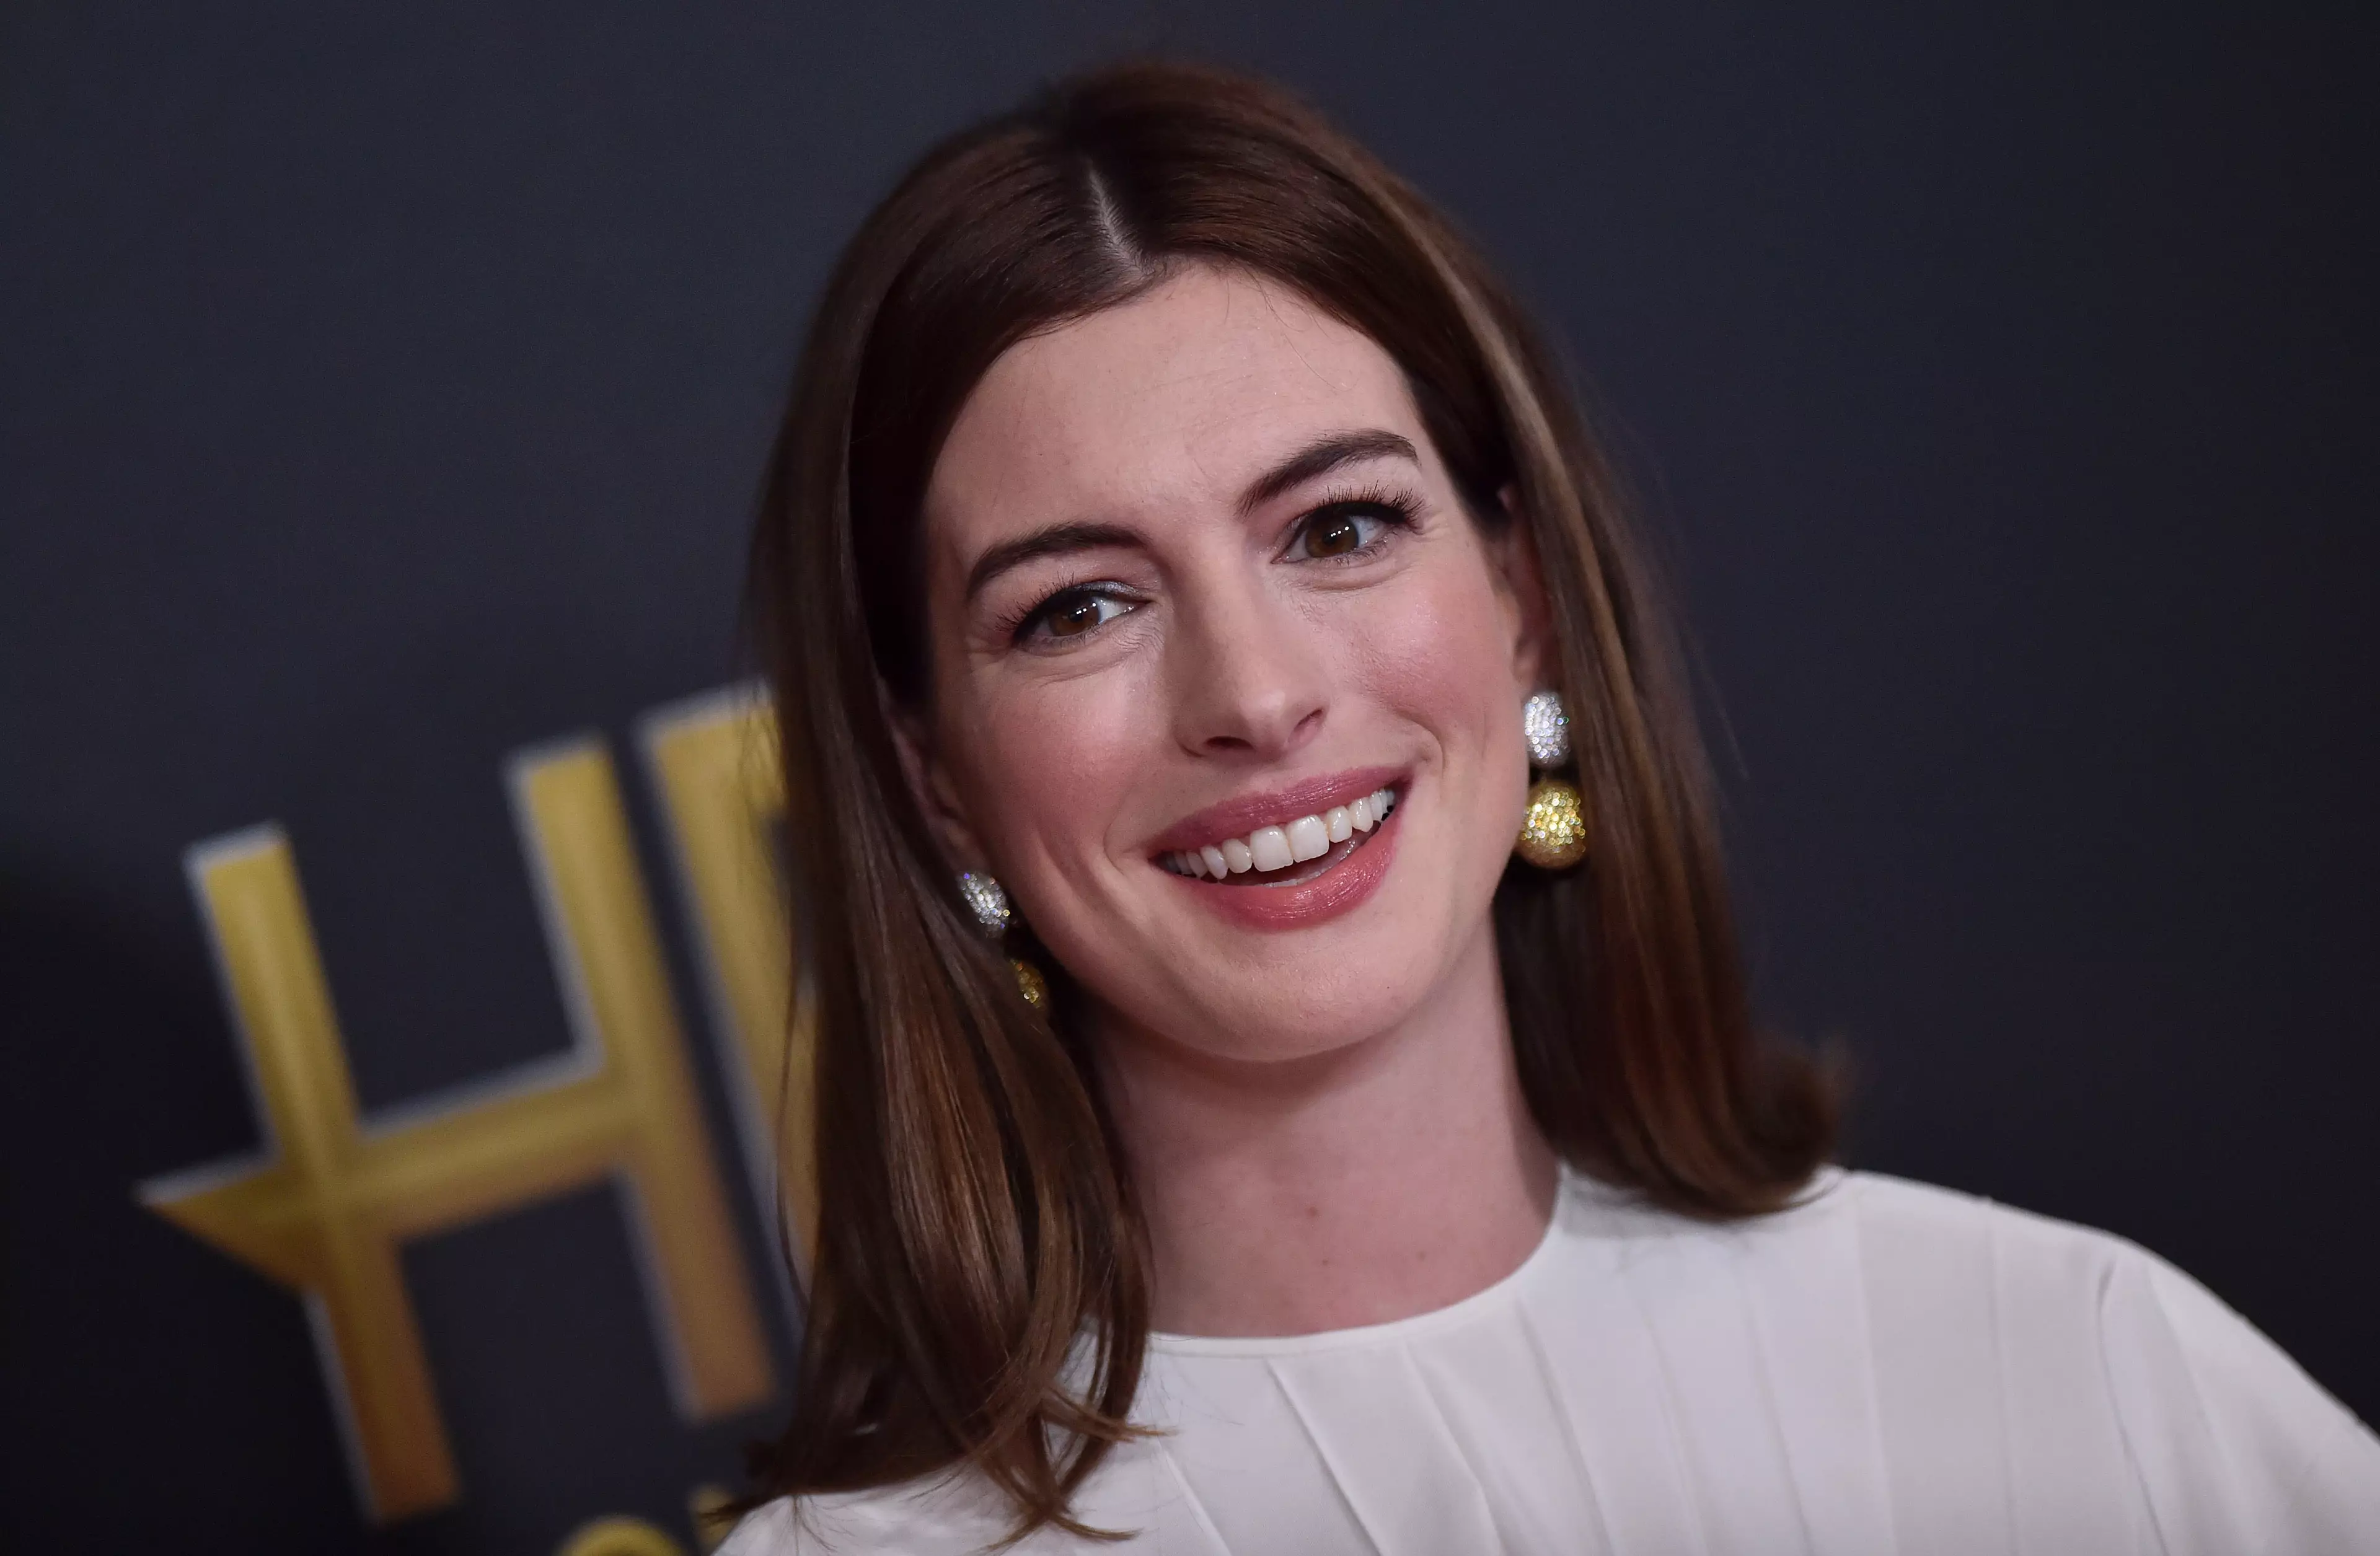 Anne Hathaway is set to take on the role of the Grand High Witch. (